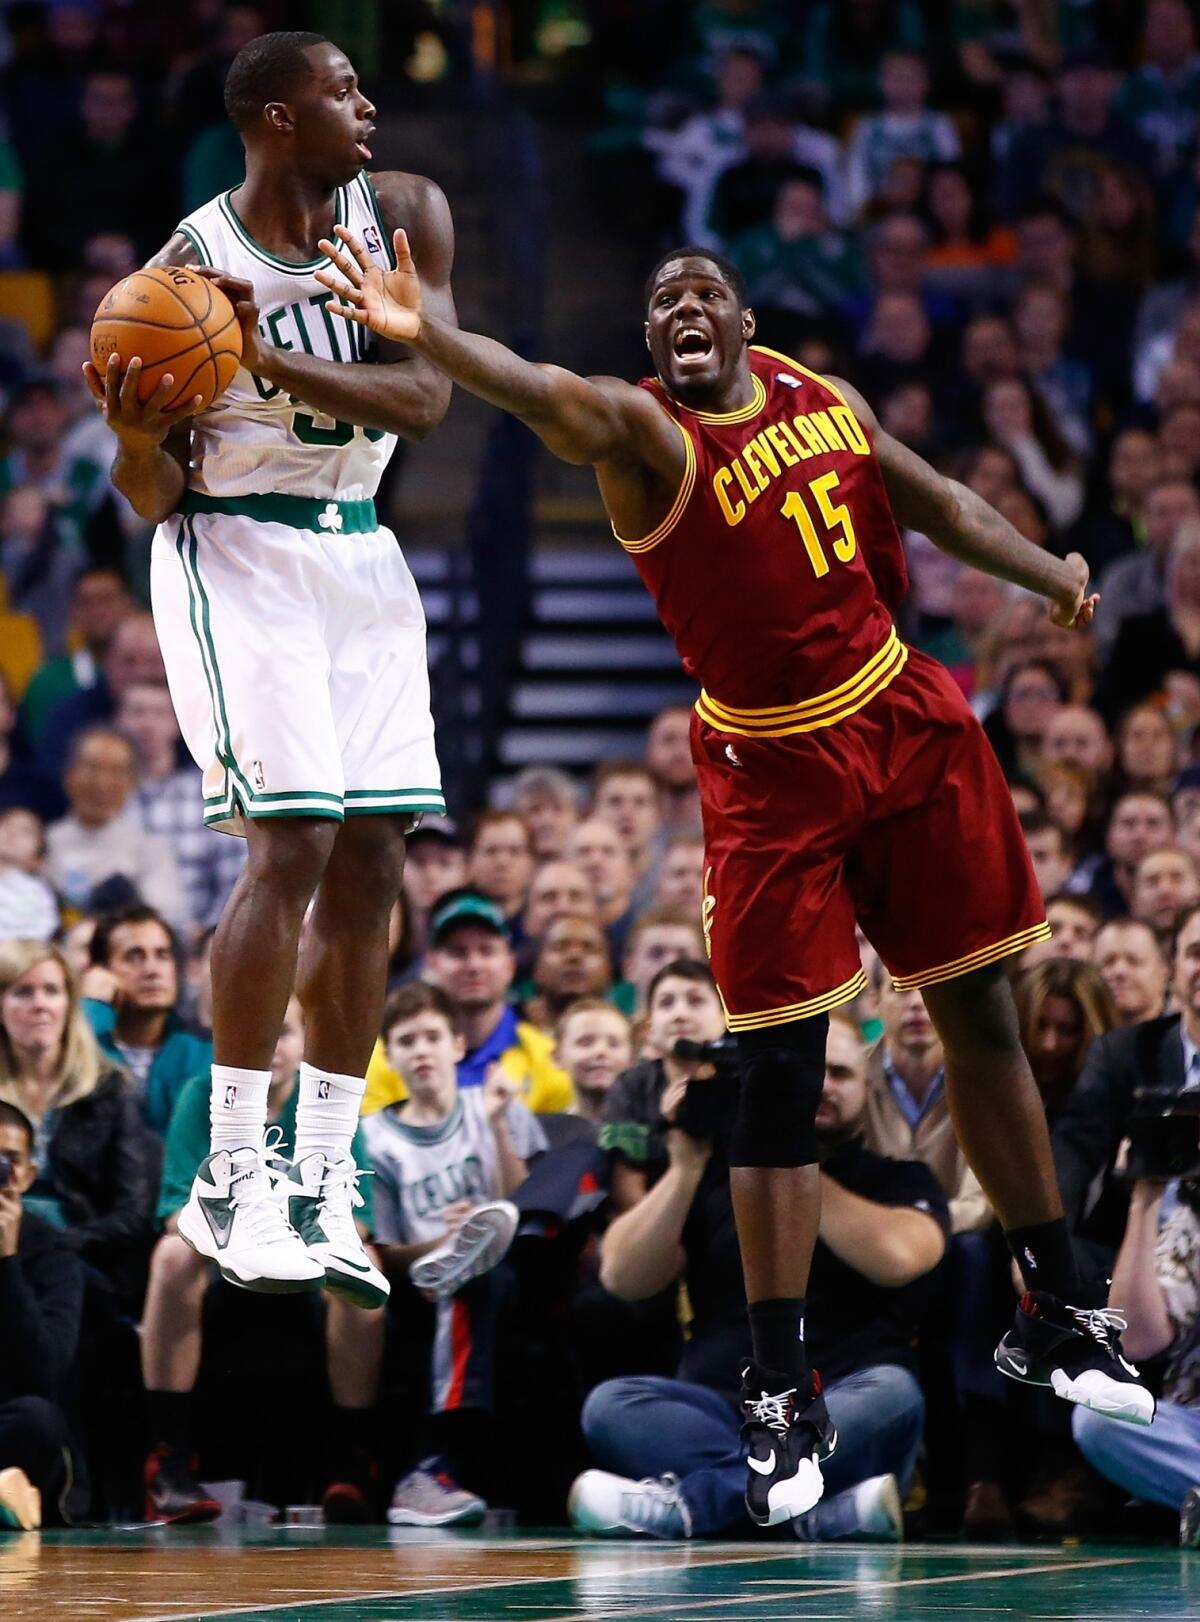 Boston's Brandon Bass, left, grabs a rebound in front of Cleveland's Anthony Bass during the Celtics' 103-100 win Saturday. Bennett isn't the only rookie who's having a disappointing season.